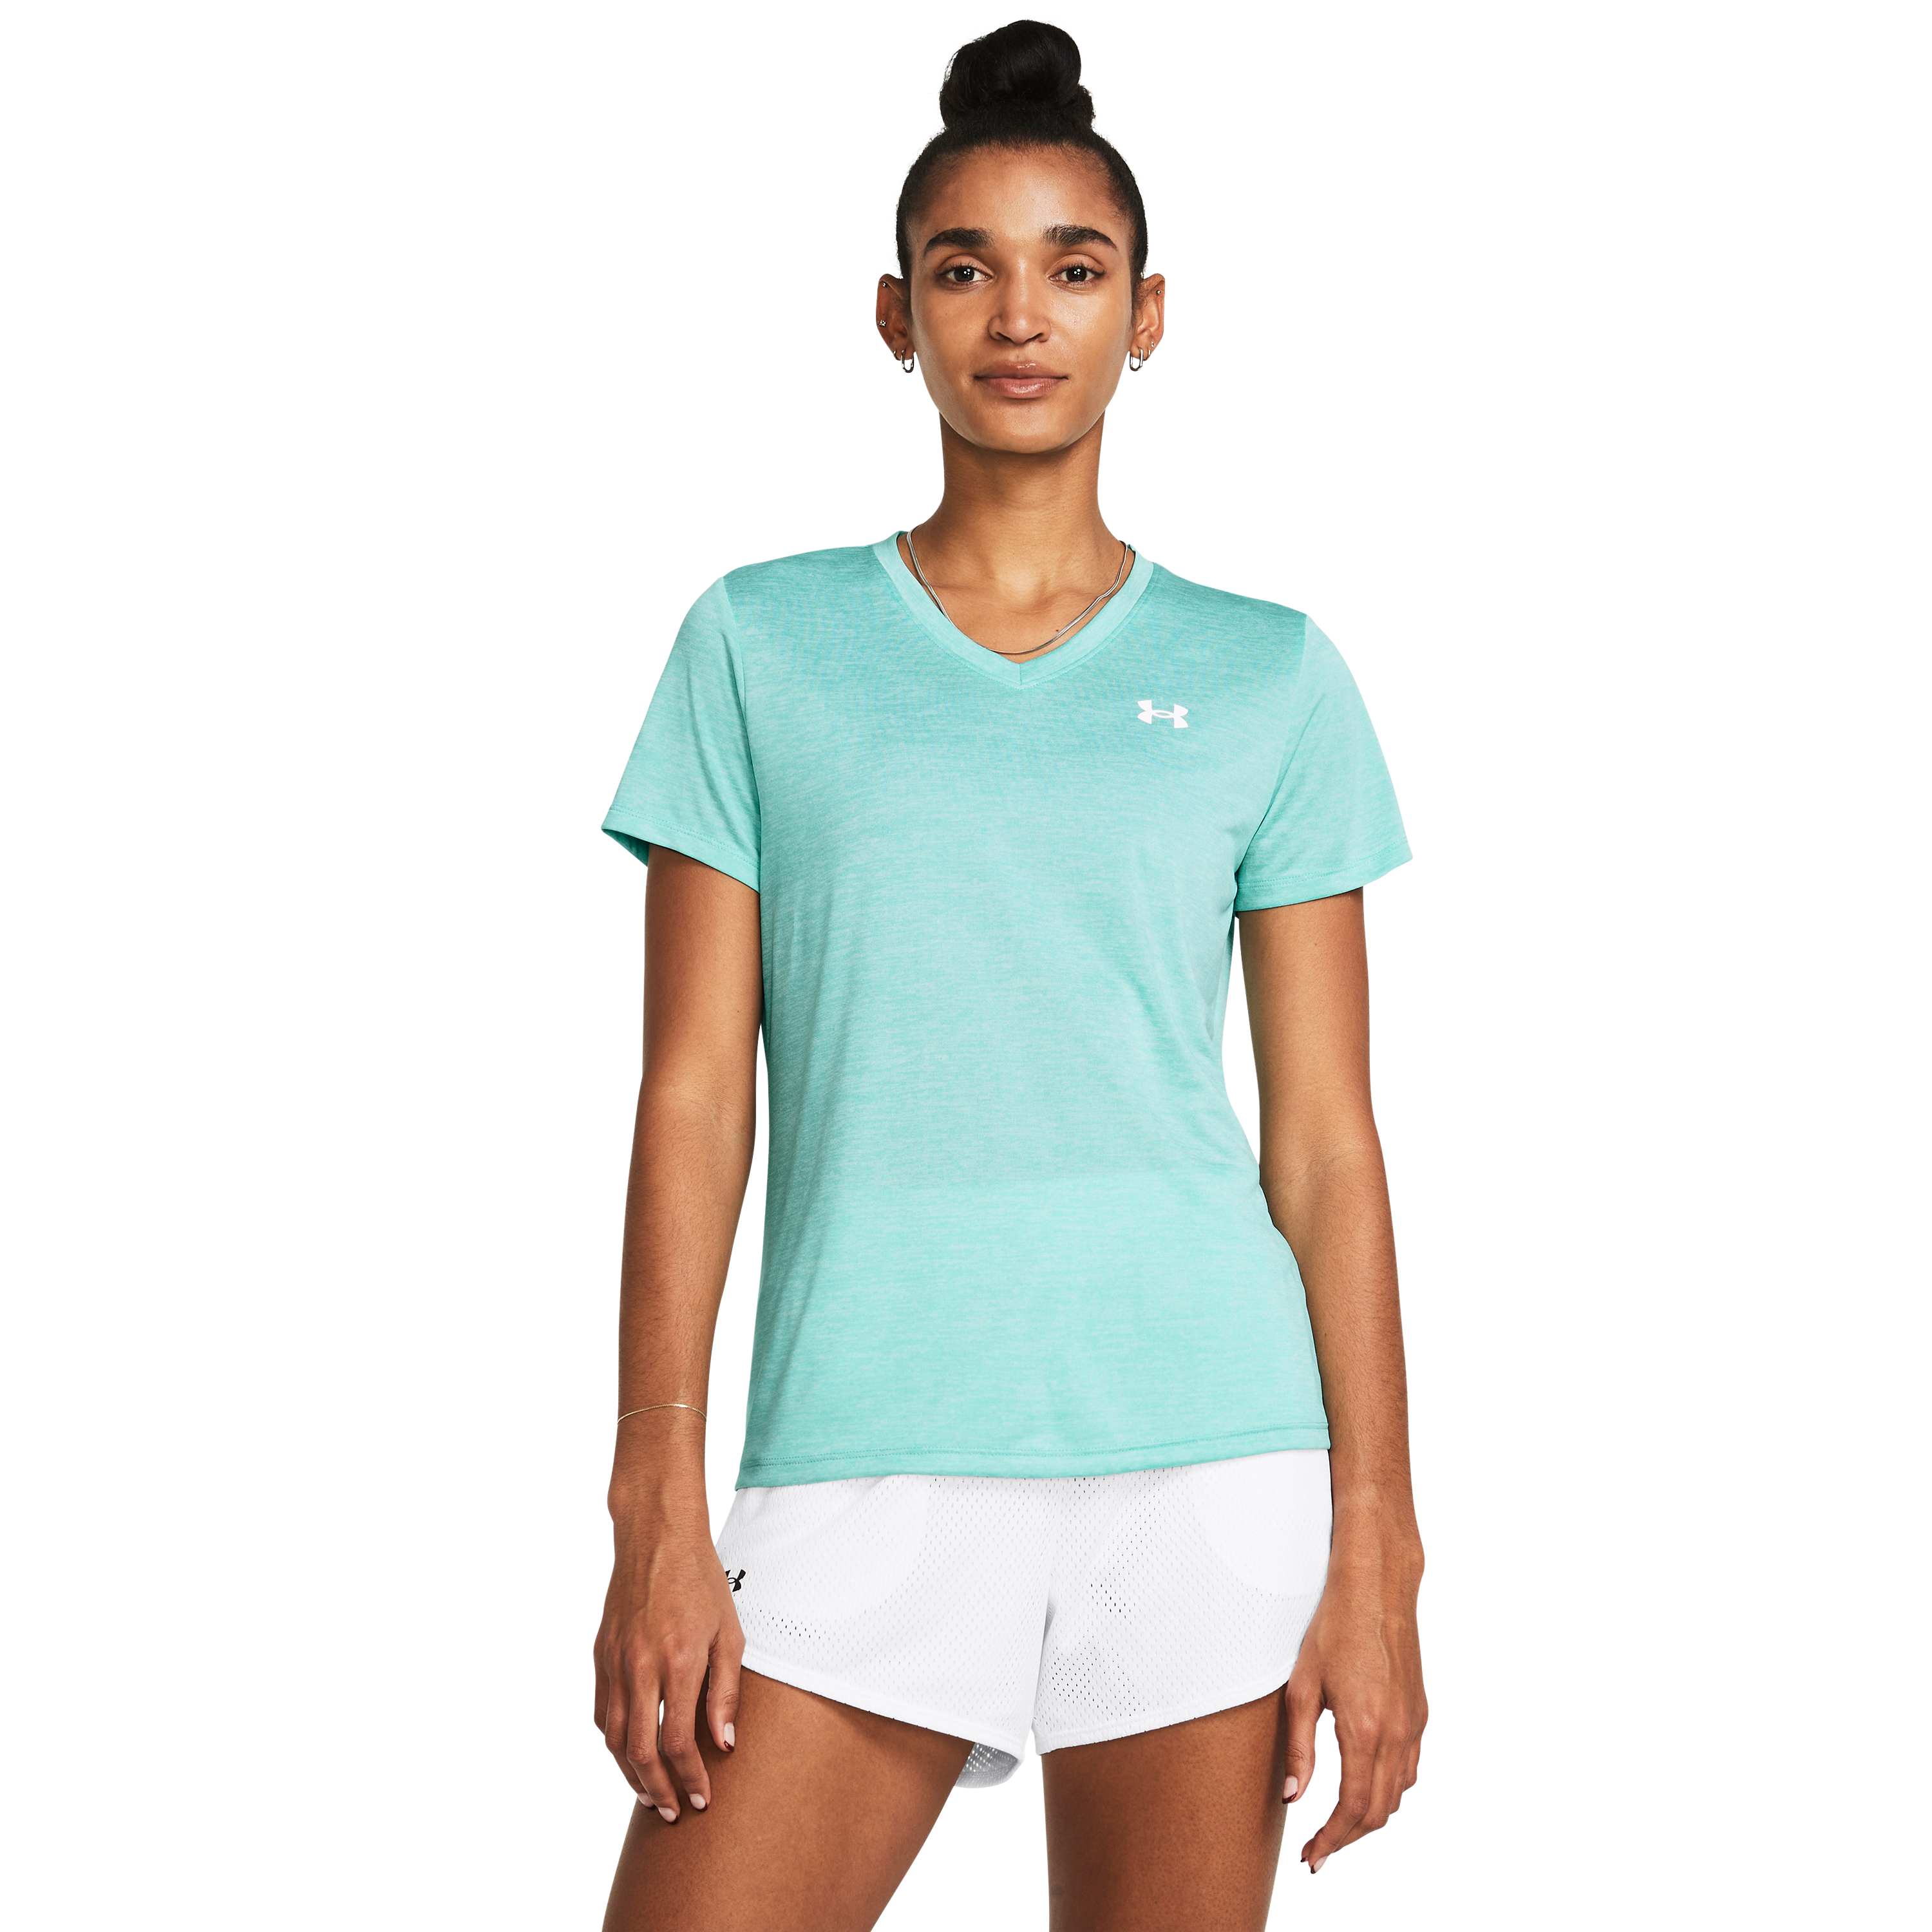 Under Armour Under Armour Tech Ssv- Twist Radial Turquoise/White XS, Green